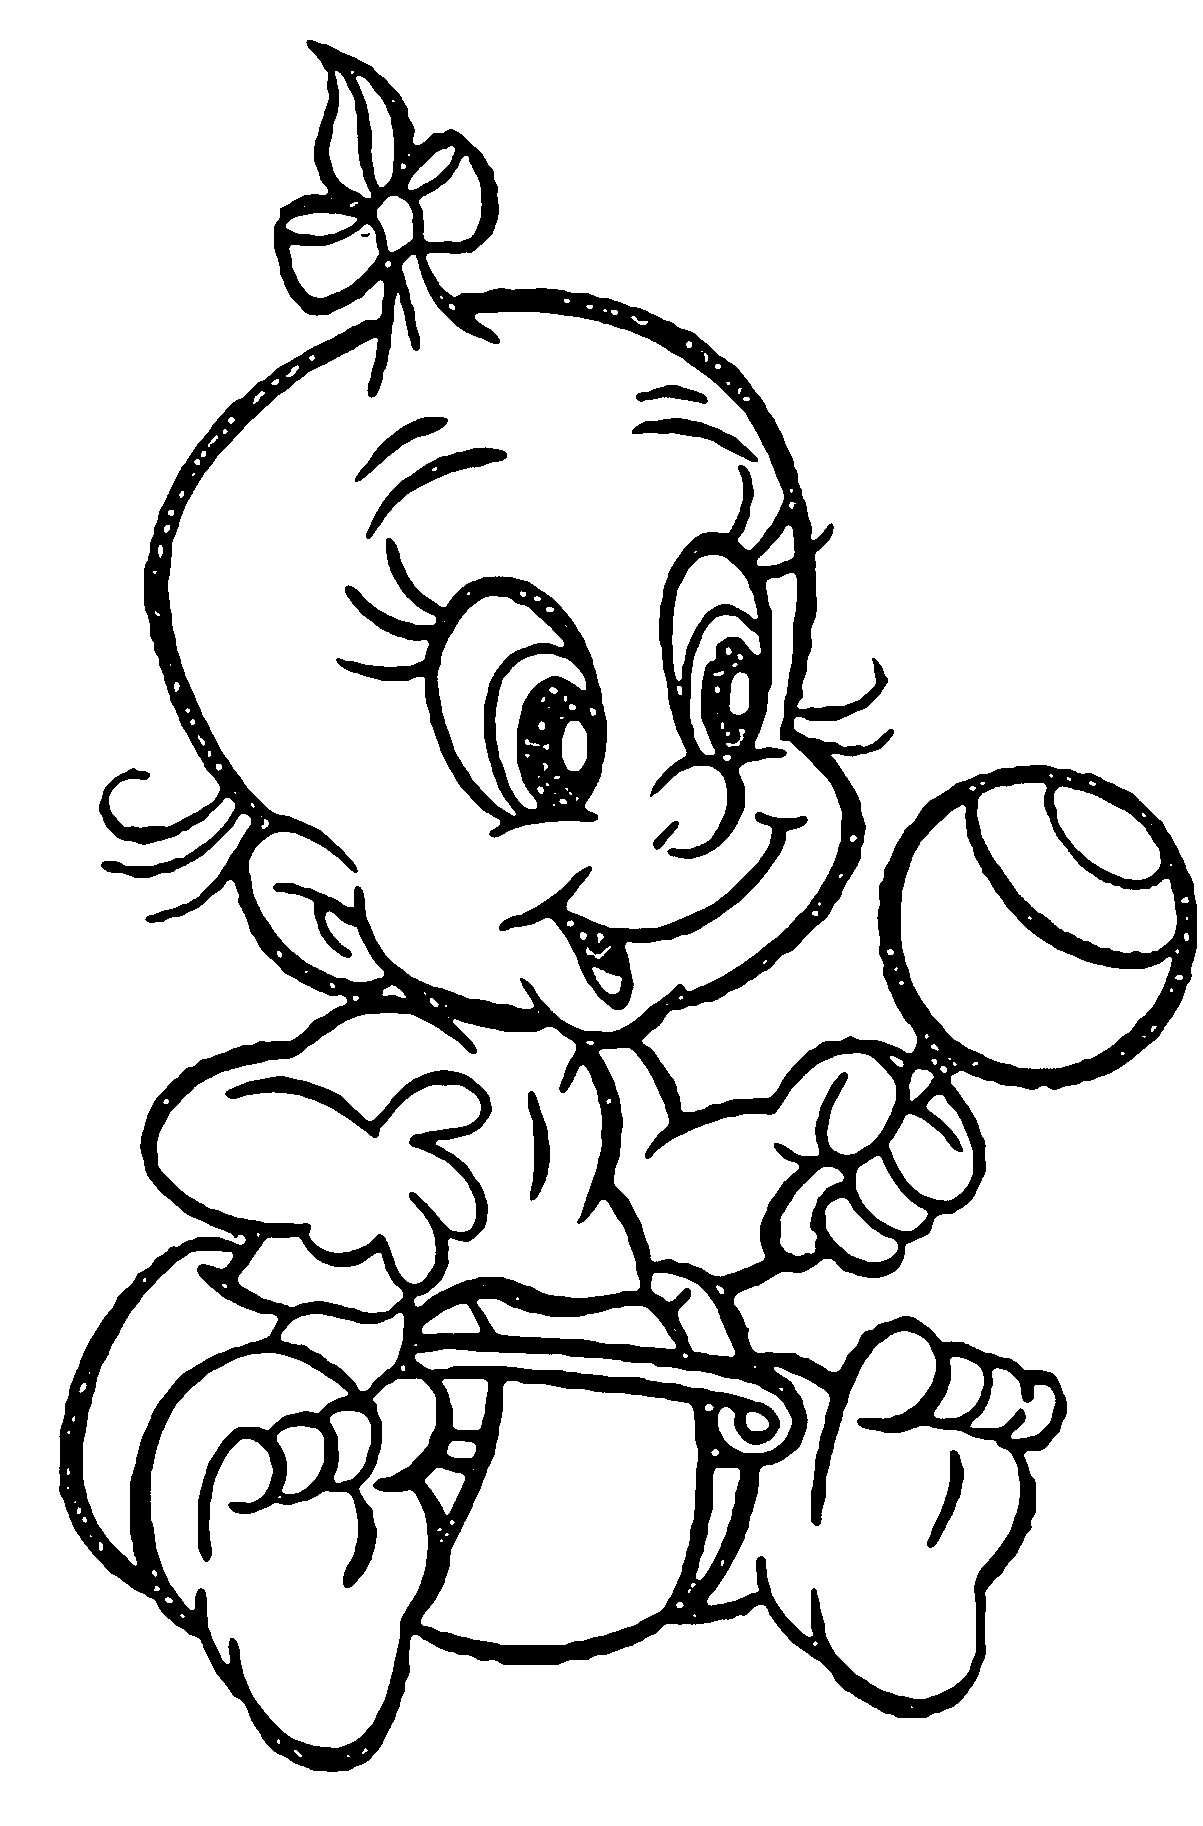 Baby Rabbit Coloring Pages
 Rabbit Coloring Pages